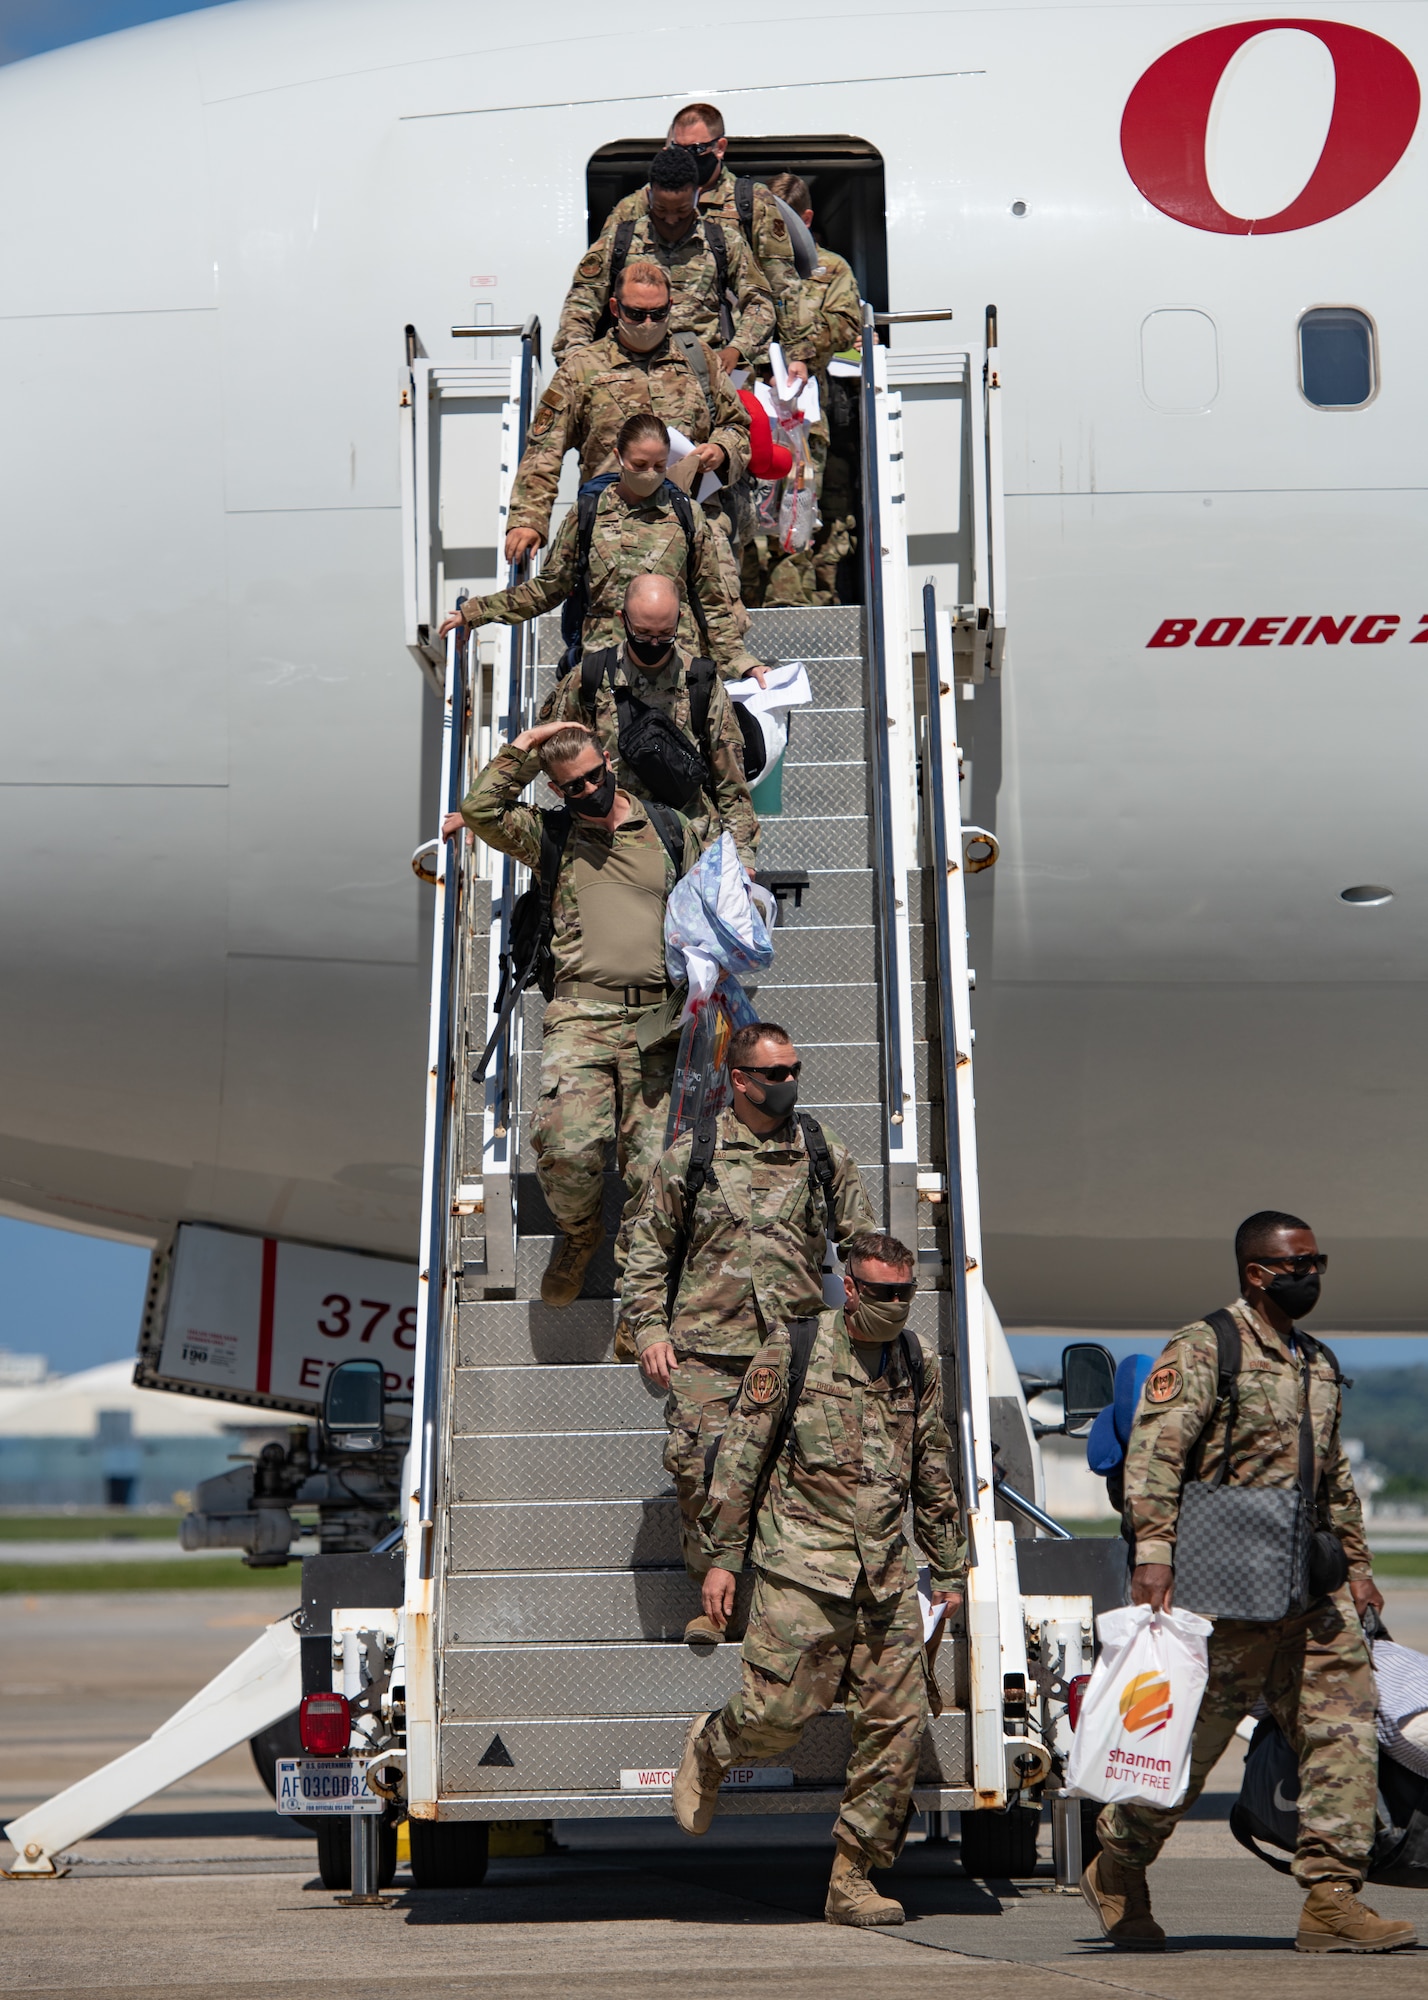 Airmen from the 18th Wing disembark an aircraft upon their return from a deployment to U.S. Central Command Oct. 6, 2020, at Kadena Air Base, Japan. More than 300 Airmen assigned to the 18th Operations and Maintenance Groups as well as pilots and aircraft assigned to the 44th Fighter Squadron deployed to the CENTCOM theater to defend U.S. and partner nation interests. During their deployment, Airmen conducted more than 1,000 sorties and 5,300 combat hours, which drove 13 phase inspections in six months. They’ll share the skills they learned in combat with Team Kadena, joint partners and allies to ensure a free and open Indo-Pacific. (U.S. Air Force photo by Staff Sgt. Peter Reft)